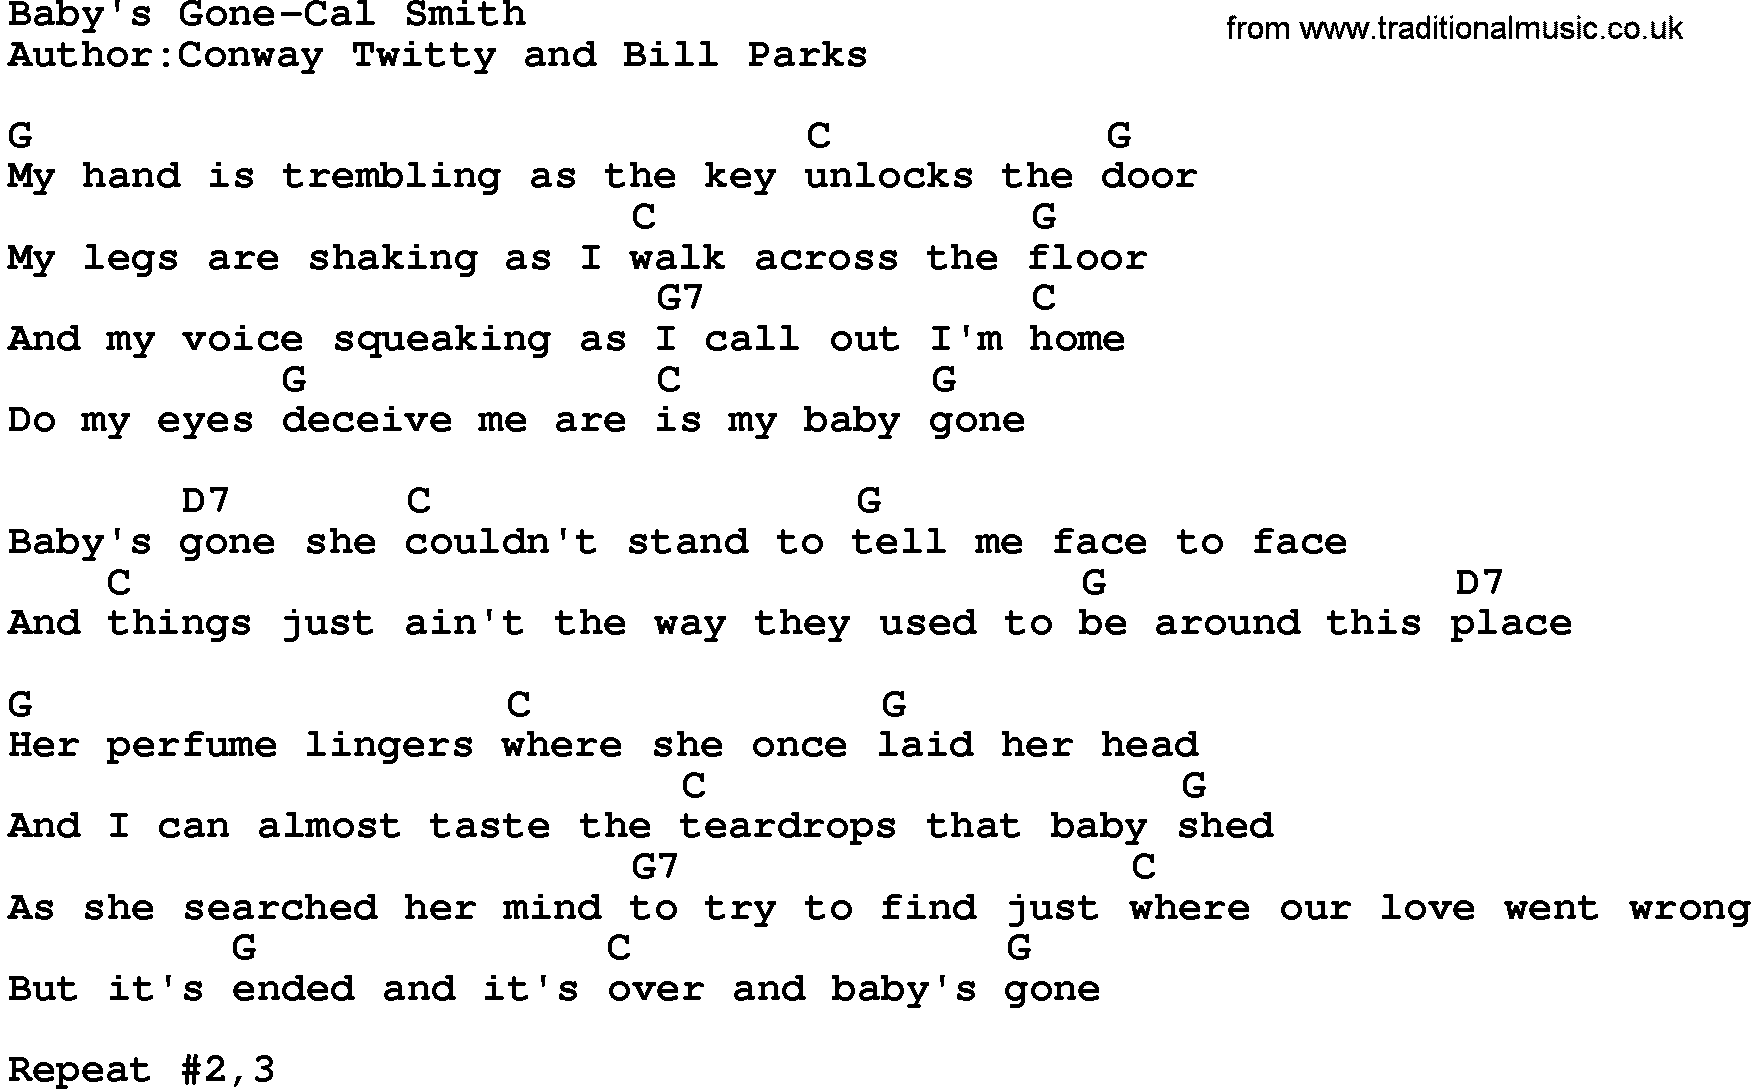 Country music song: Baby's Gone-Cal Smith lyrics and chords